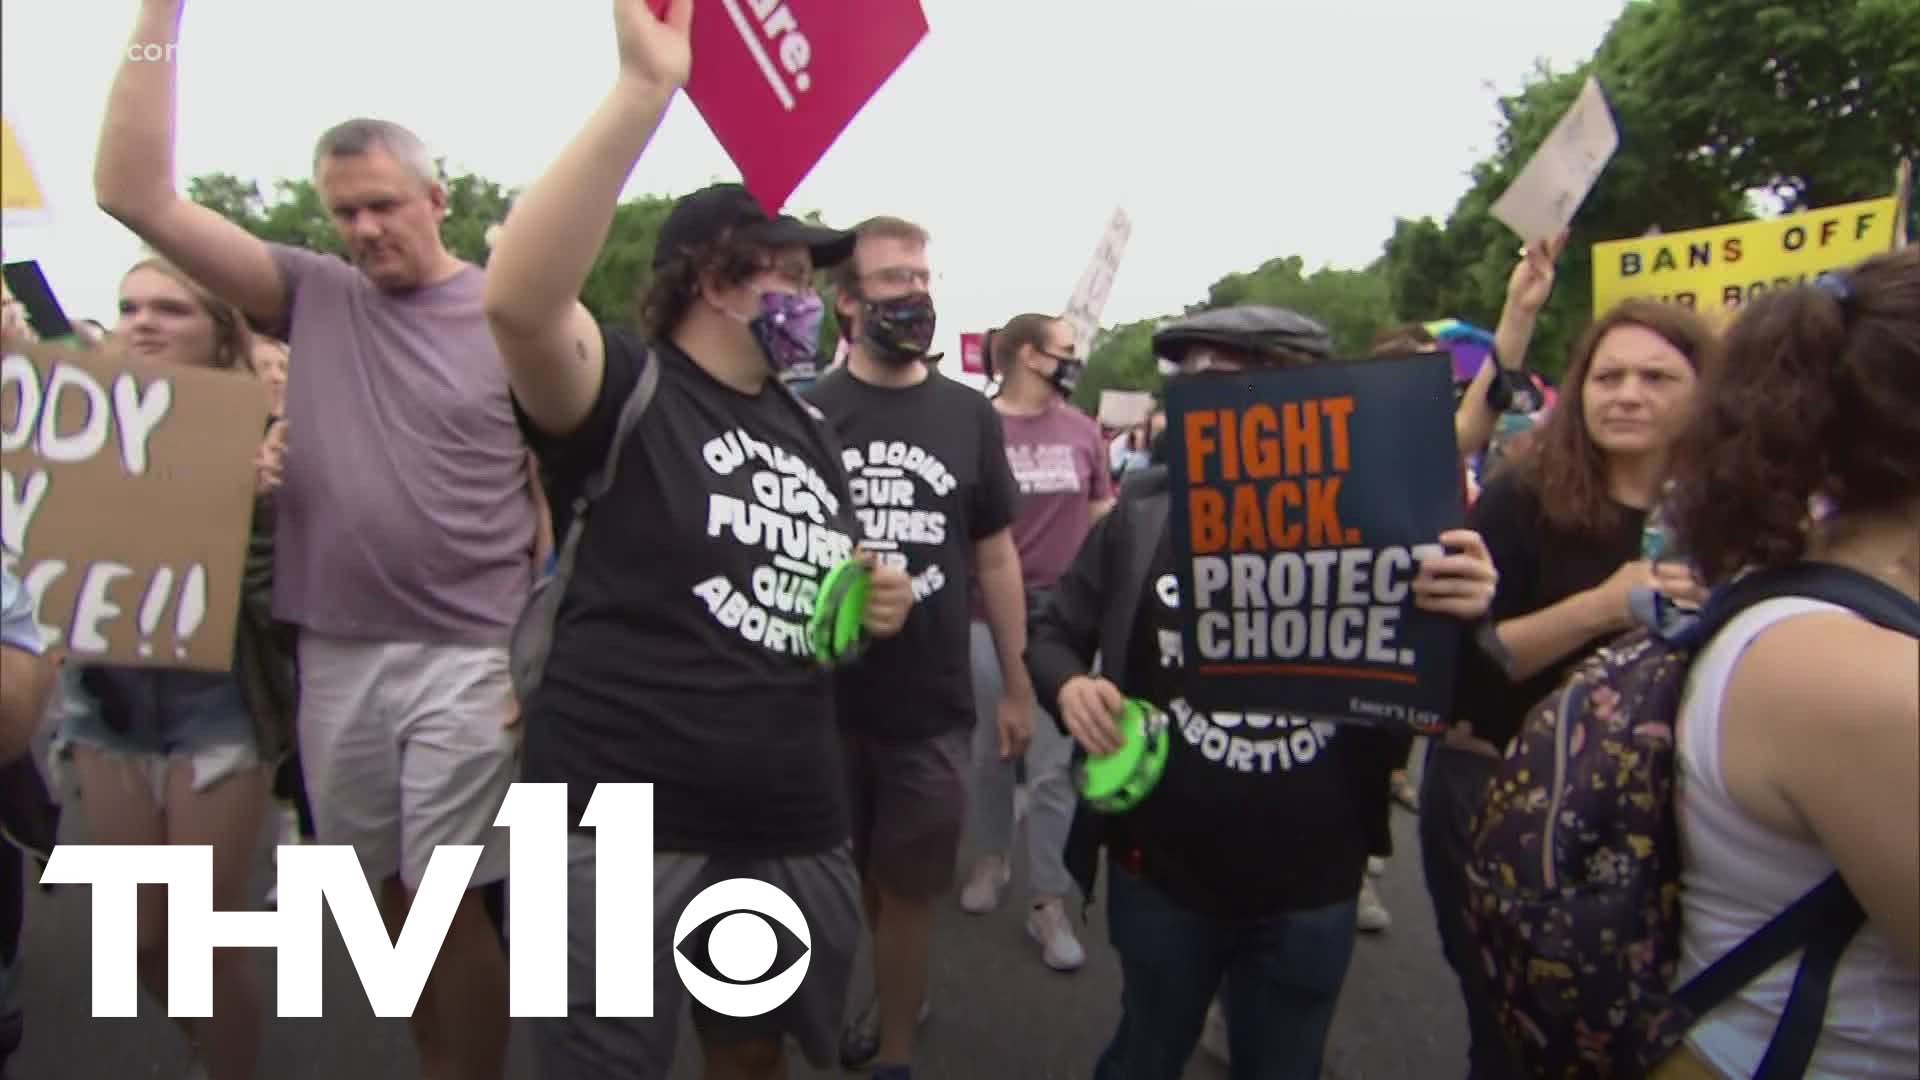 Just in Washington, thousands of protesters gathered Saturday to voice outrage over the possibility that the Supreme Court could overturn Roe vs Wade.